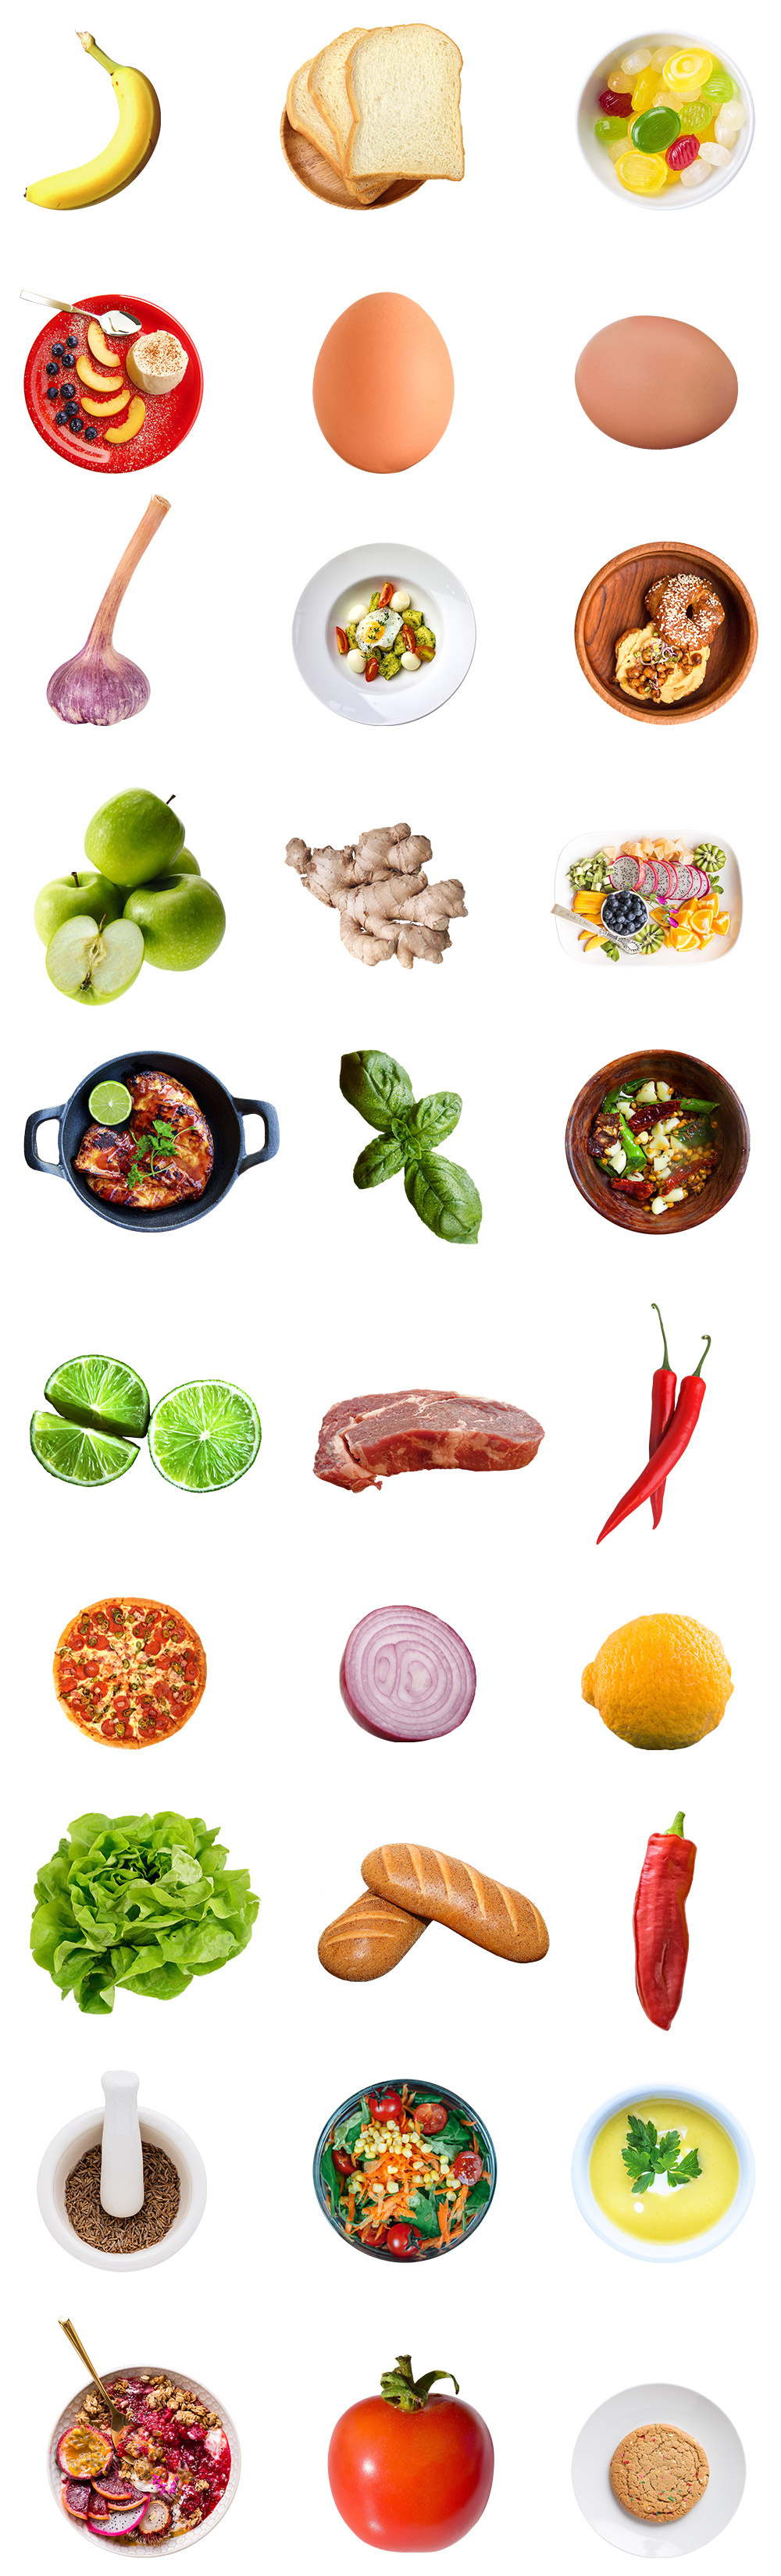 Isolated Food Images